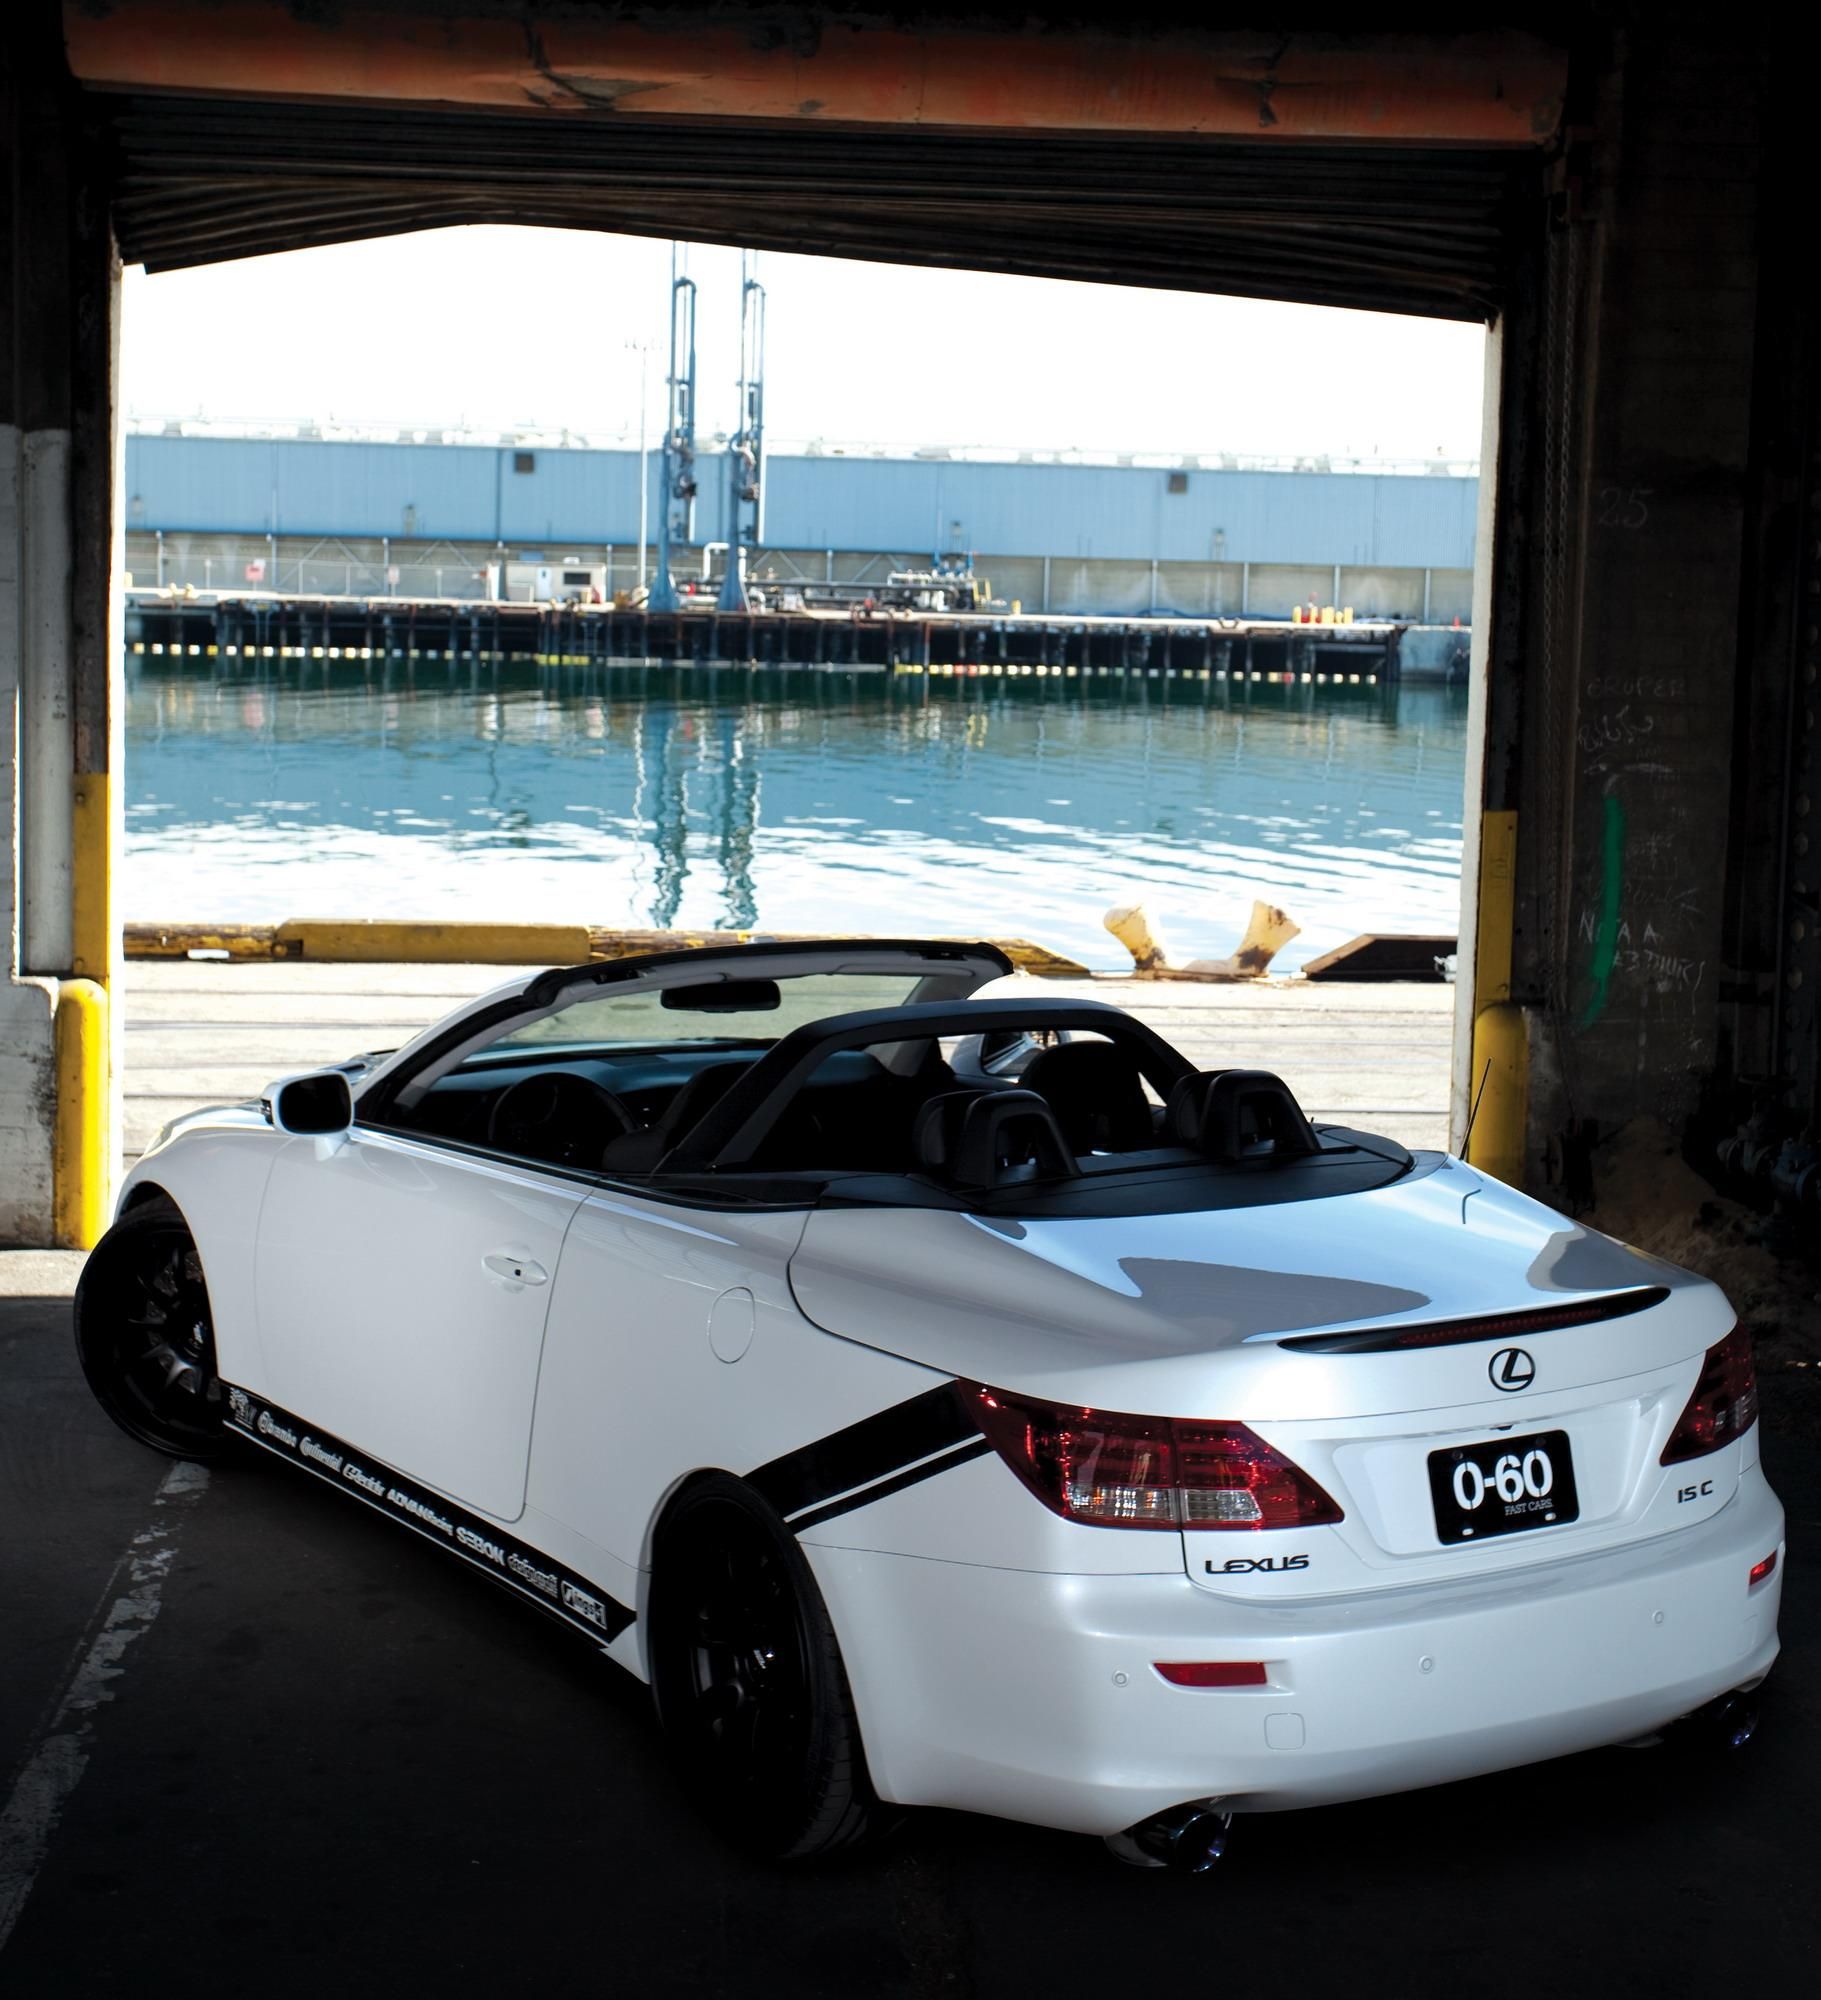 2009 Lexus IS 350C by 0-60 Magazine and Design Craft Fabrication